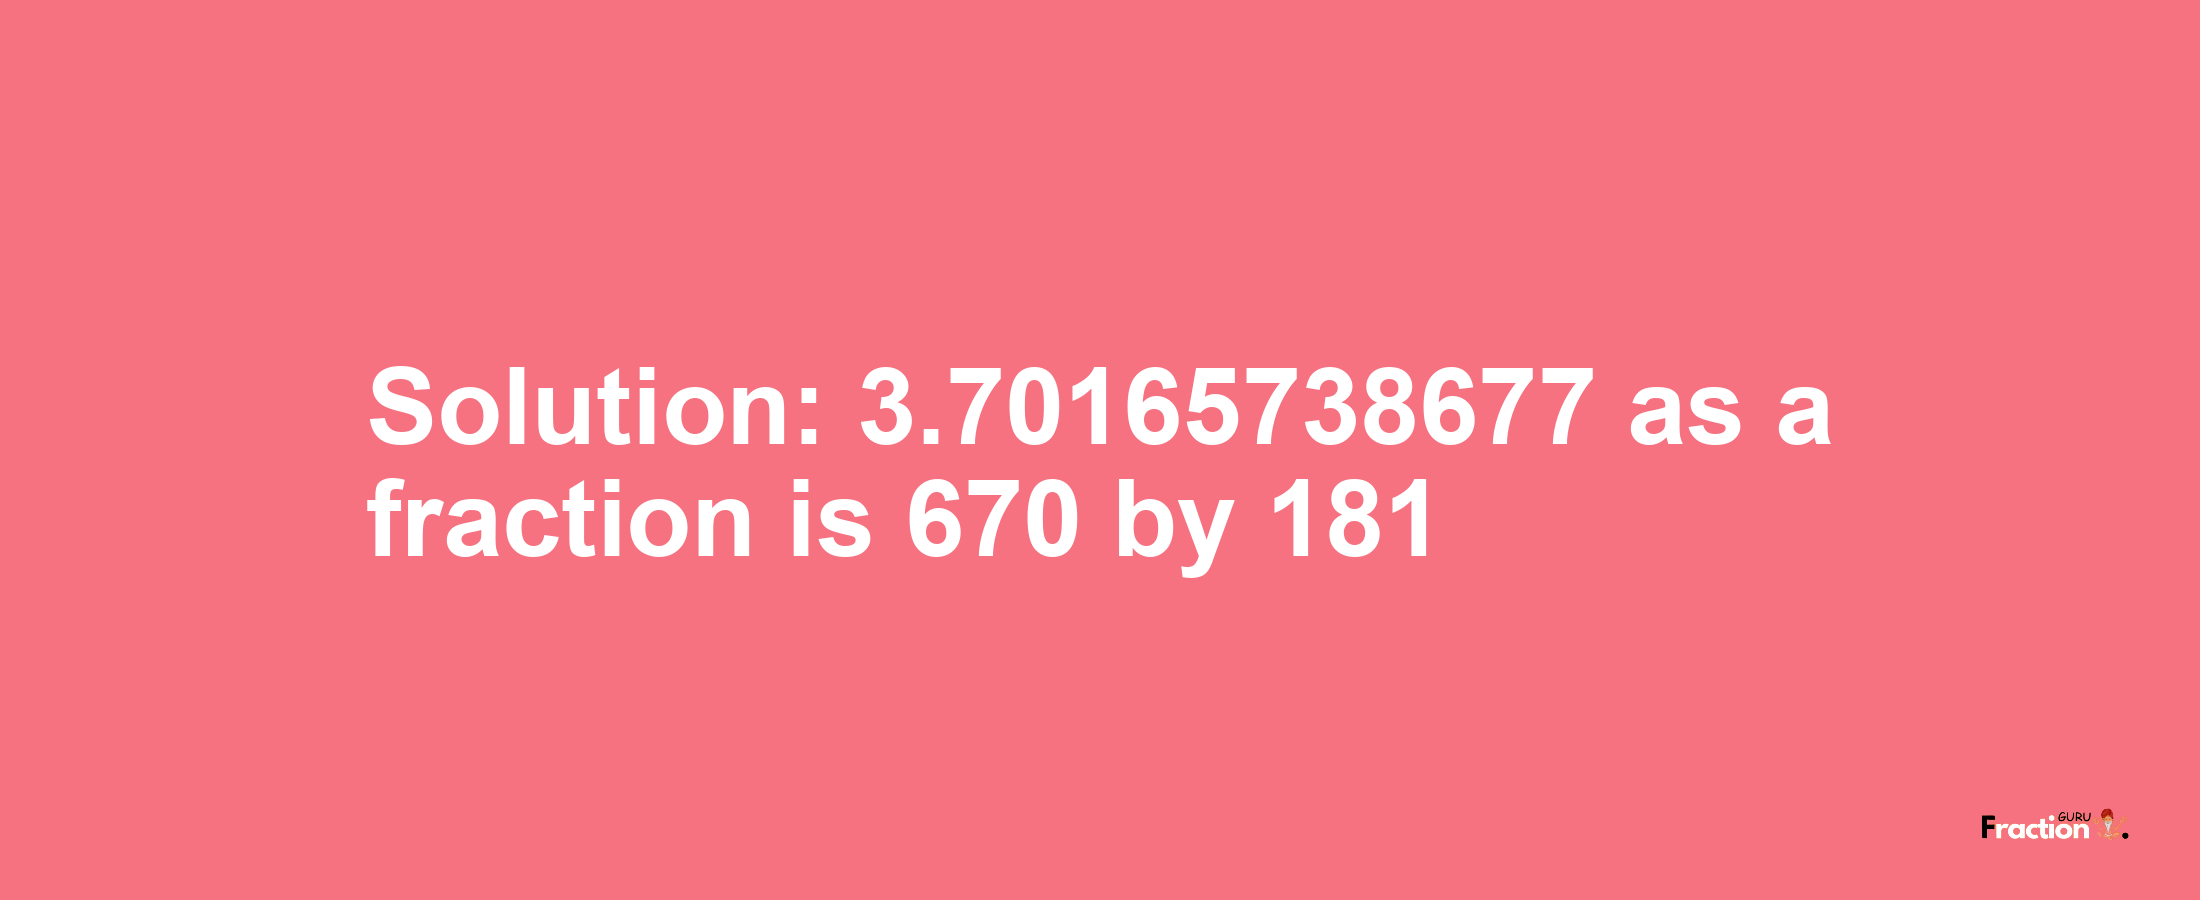 Solution:3.70165738677 as a fraction is 670/181